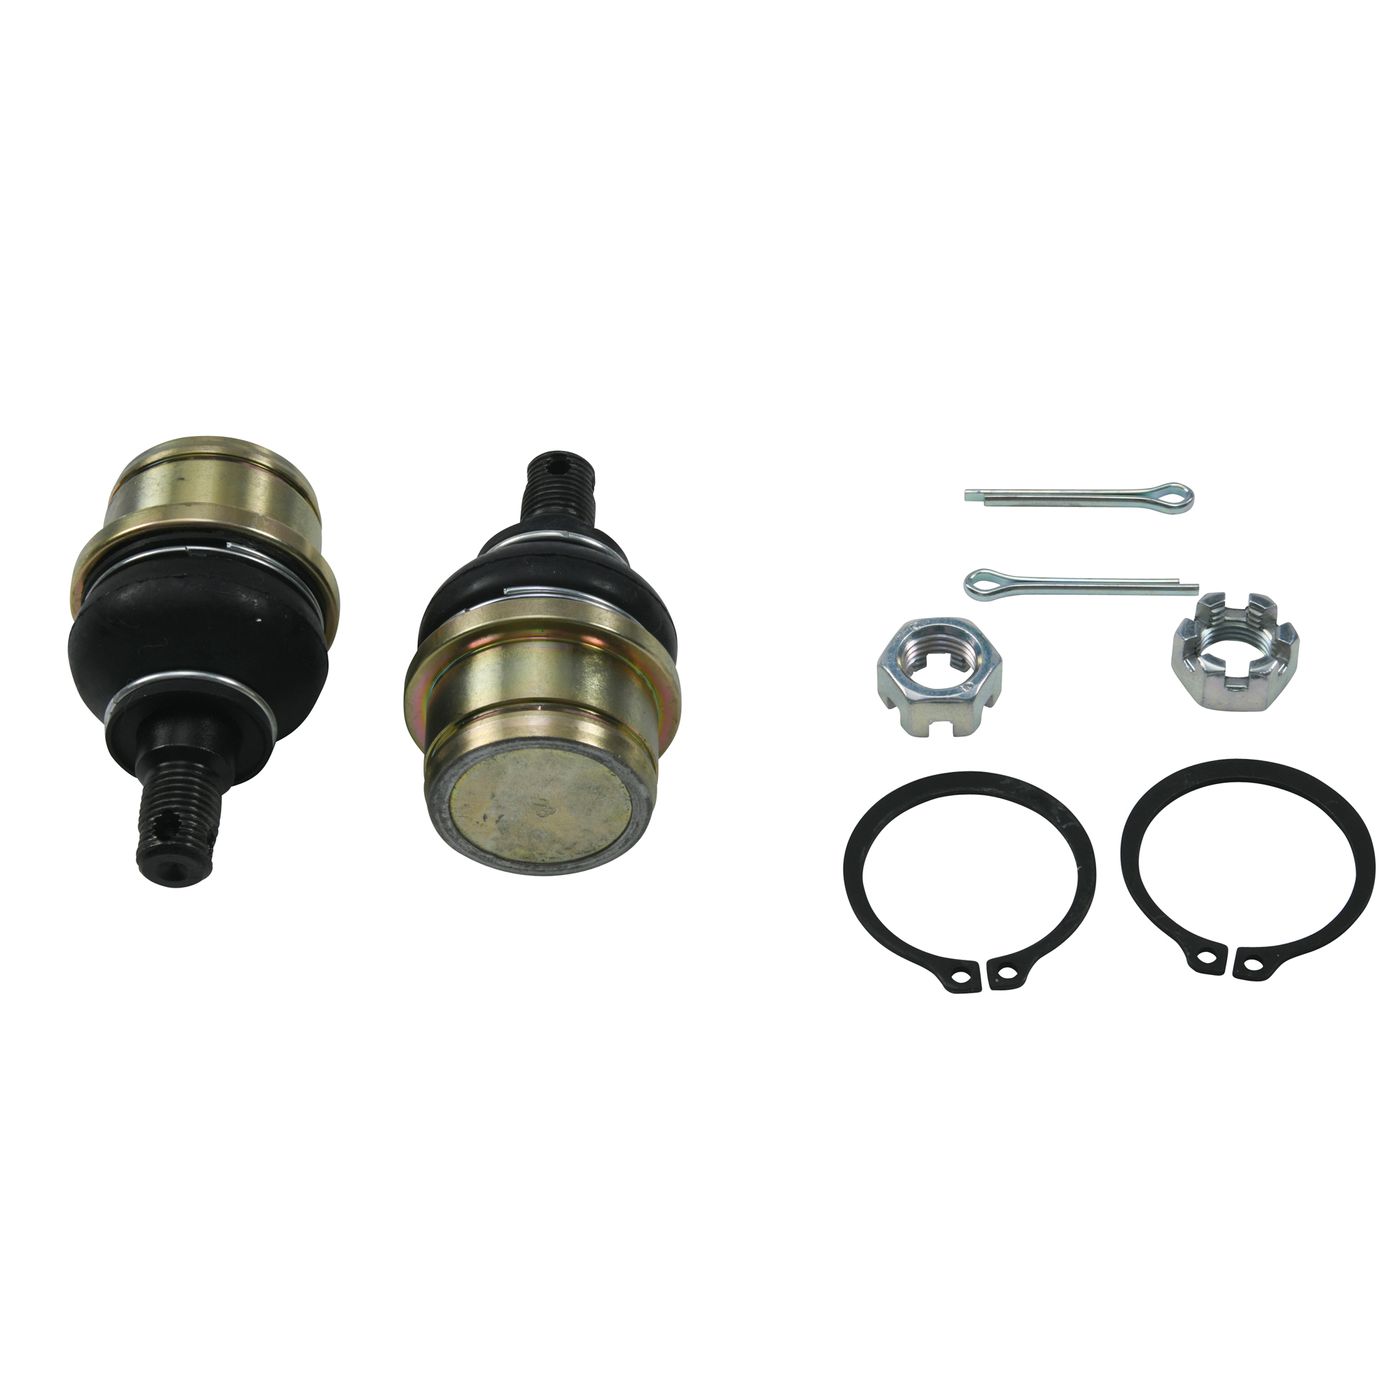 Wrp Ball Joints - WRP421015-2 image